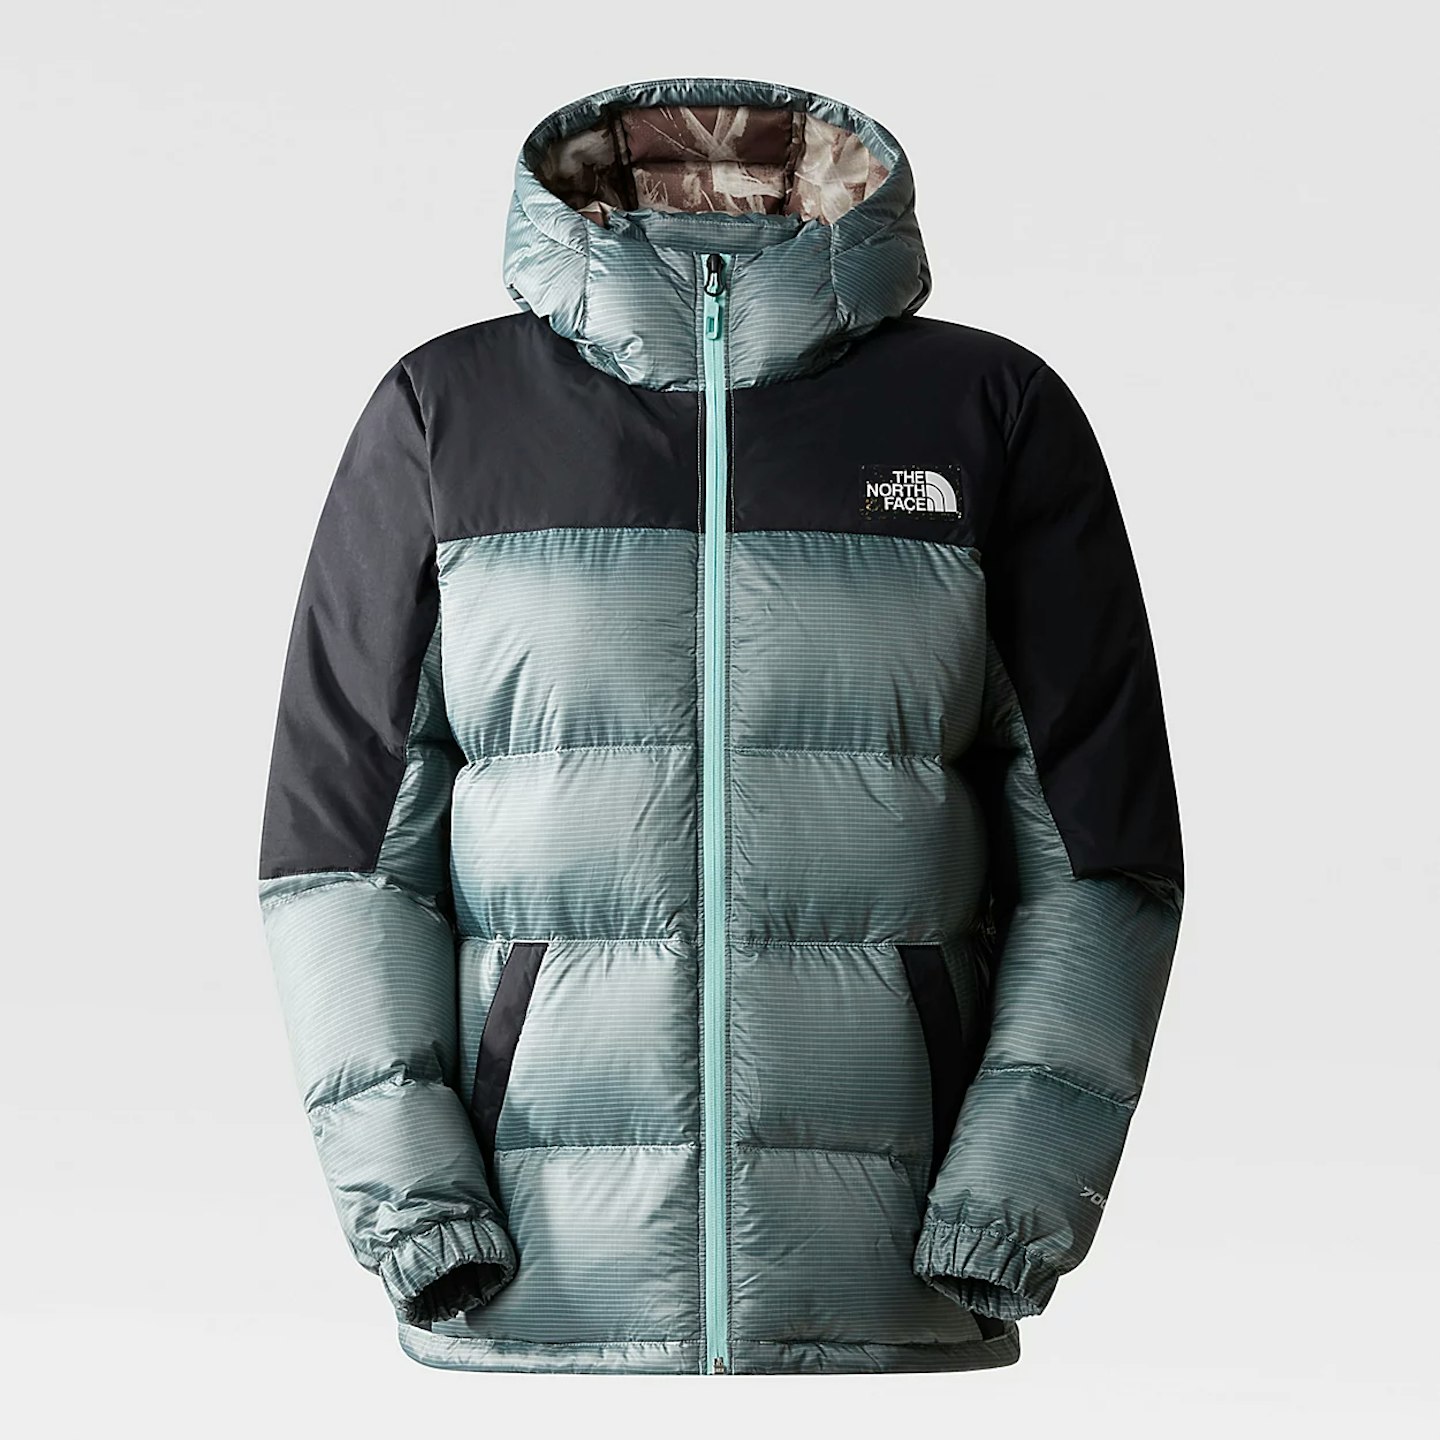 The North Face, Diablo Down Hooded Jacket